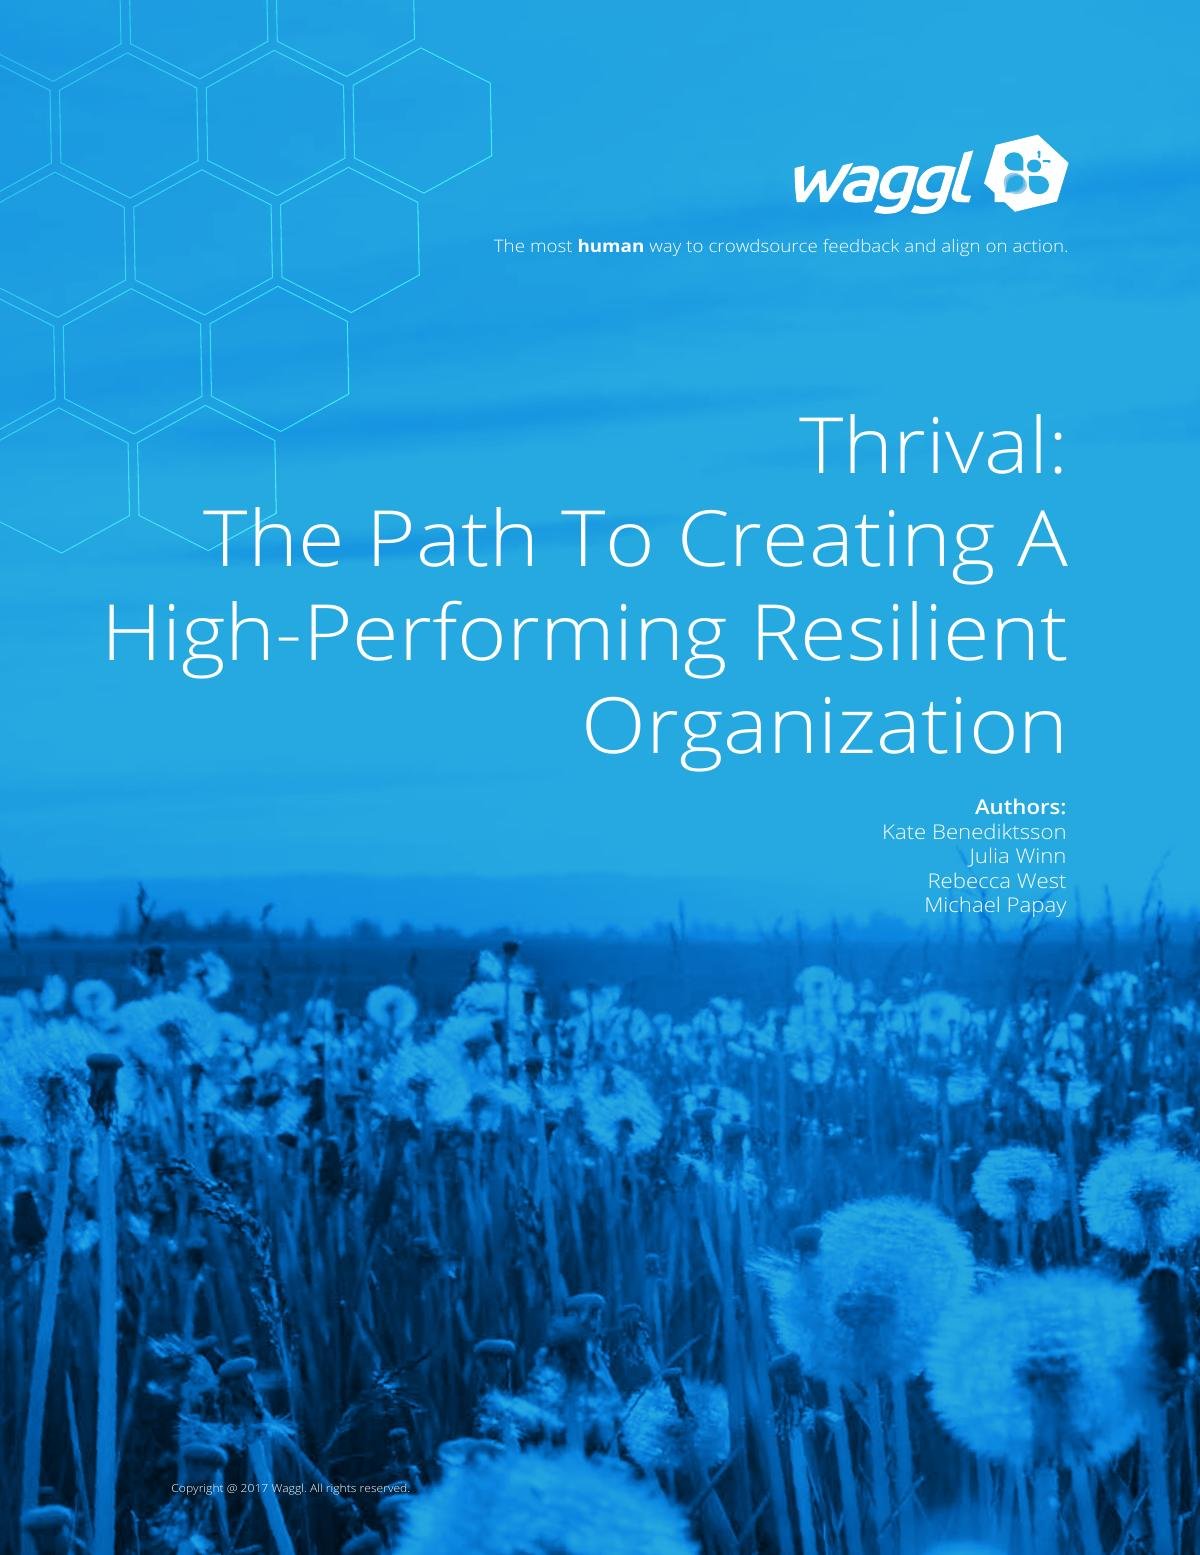 Thrival: The Path to Creating a High-Performing, Resilient Organization